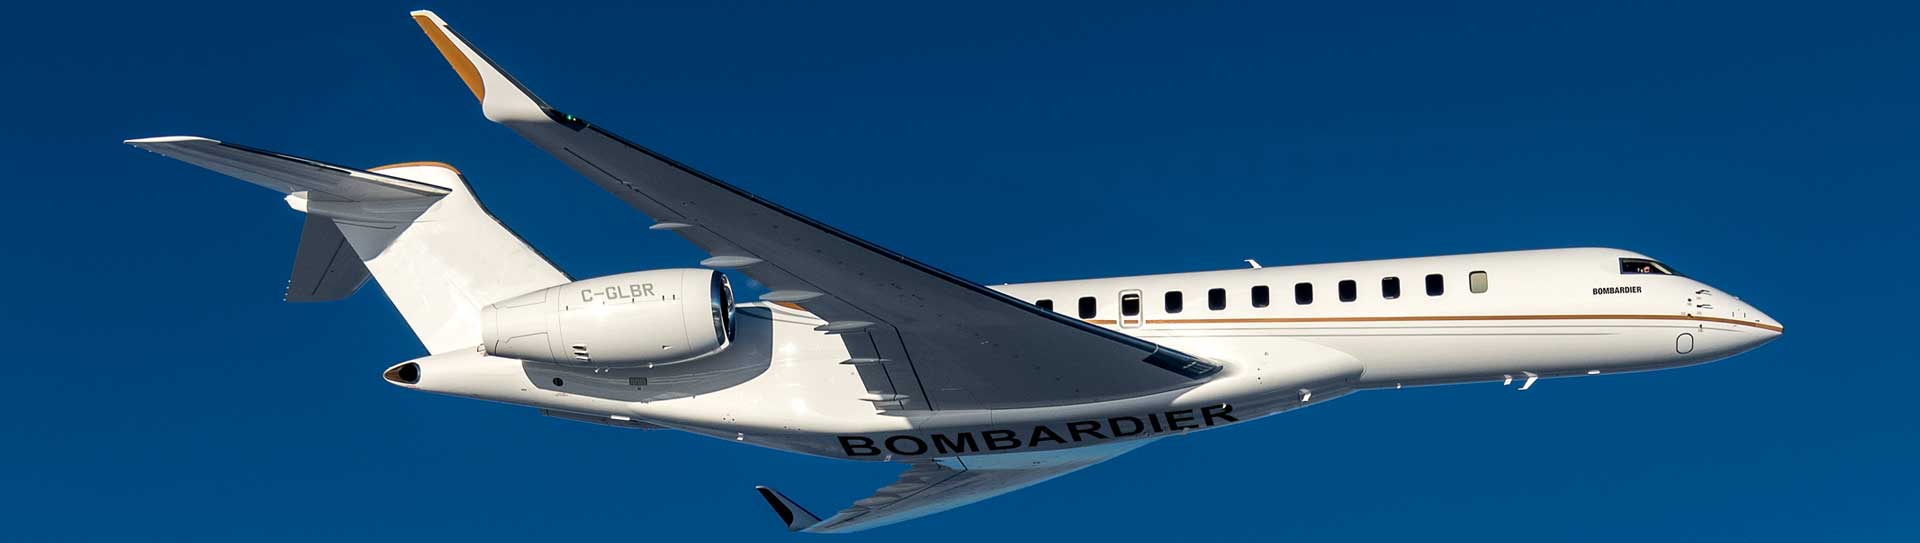 Bombardier Global 6000 Aircraft, Equipped With 2 Rolls Royce Br710a-20 Turbofan Engines